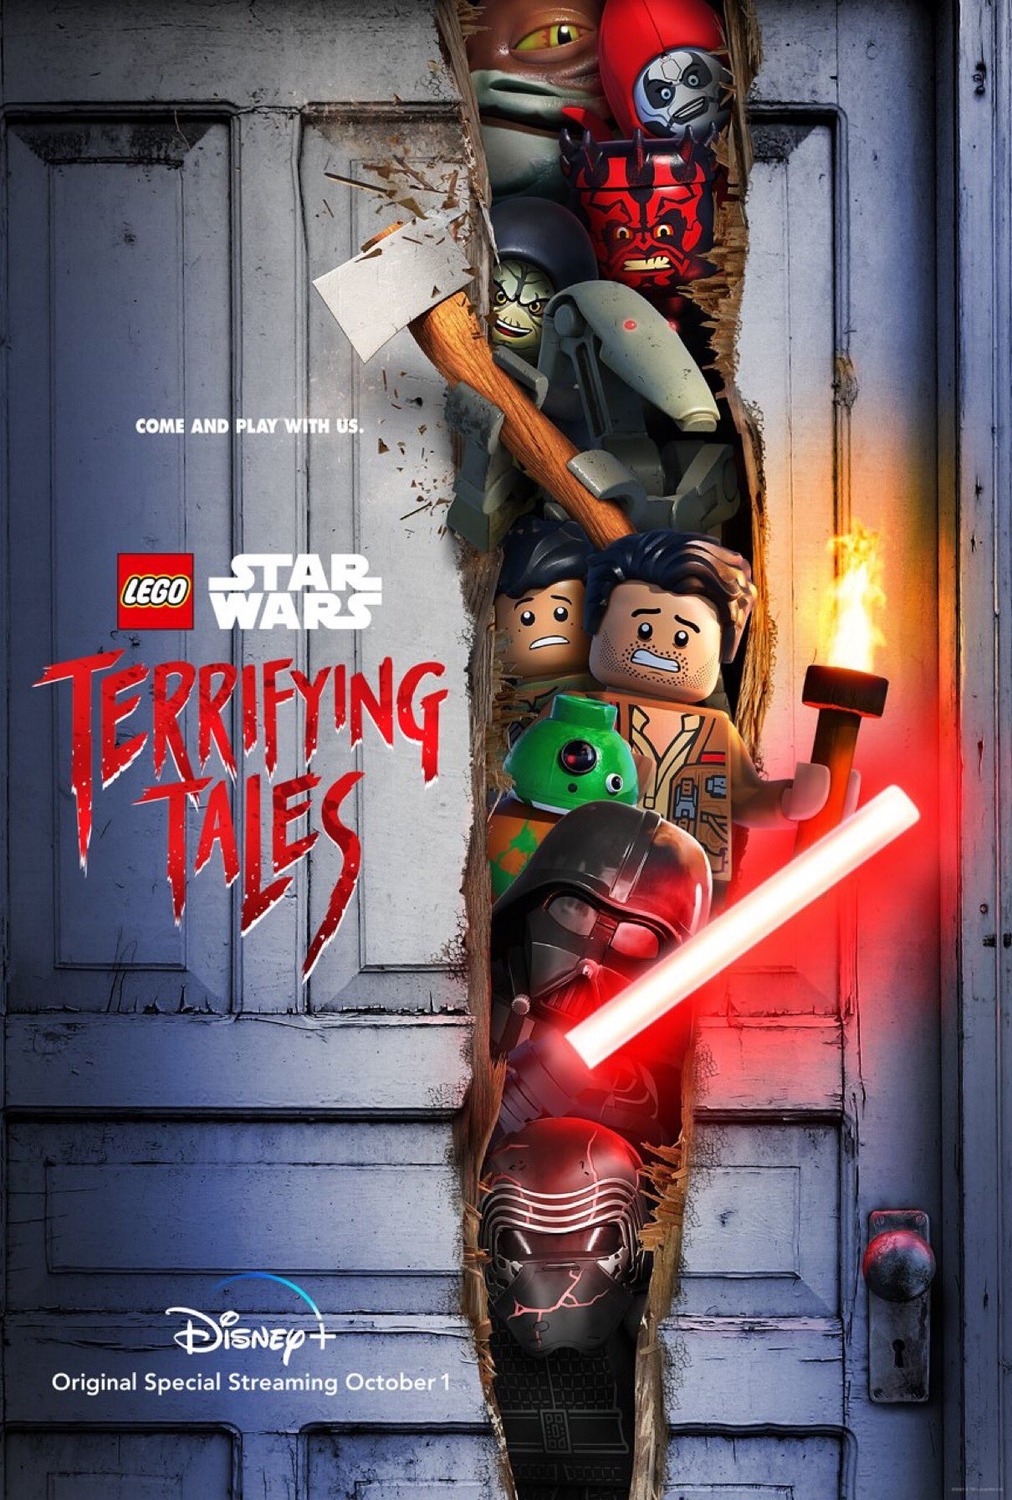 Extra Large TV Poster Image for Lego Star Wars Terrifying Tales (#2 of 5)